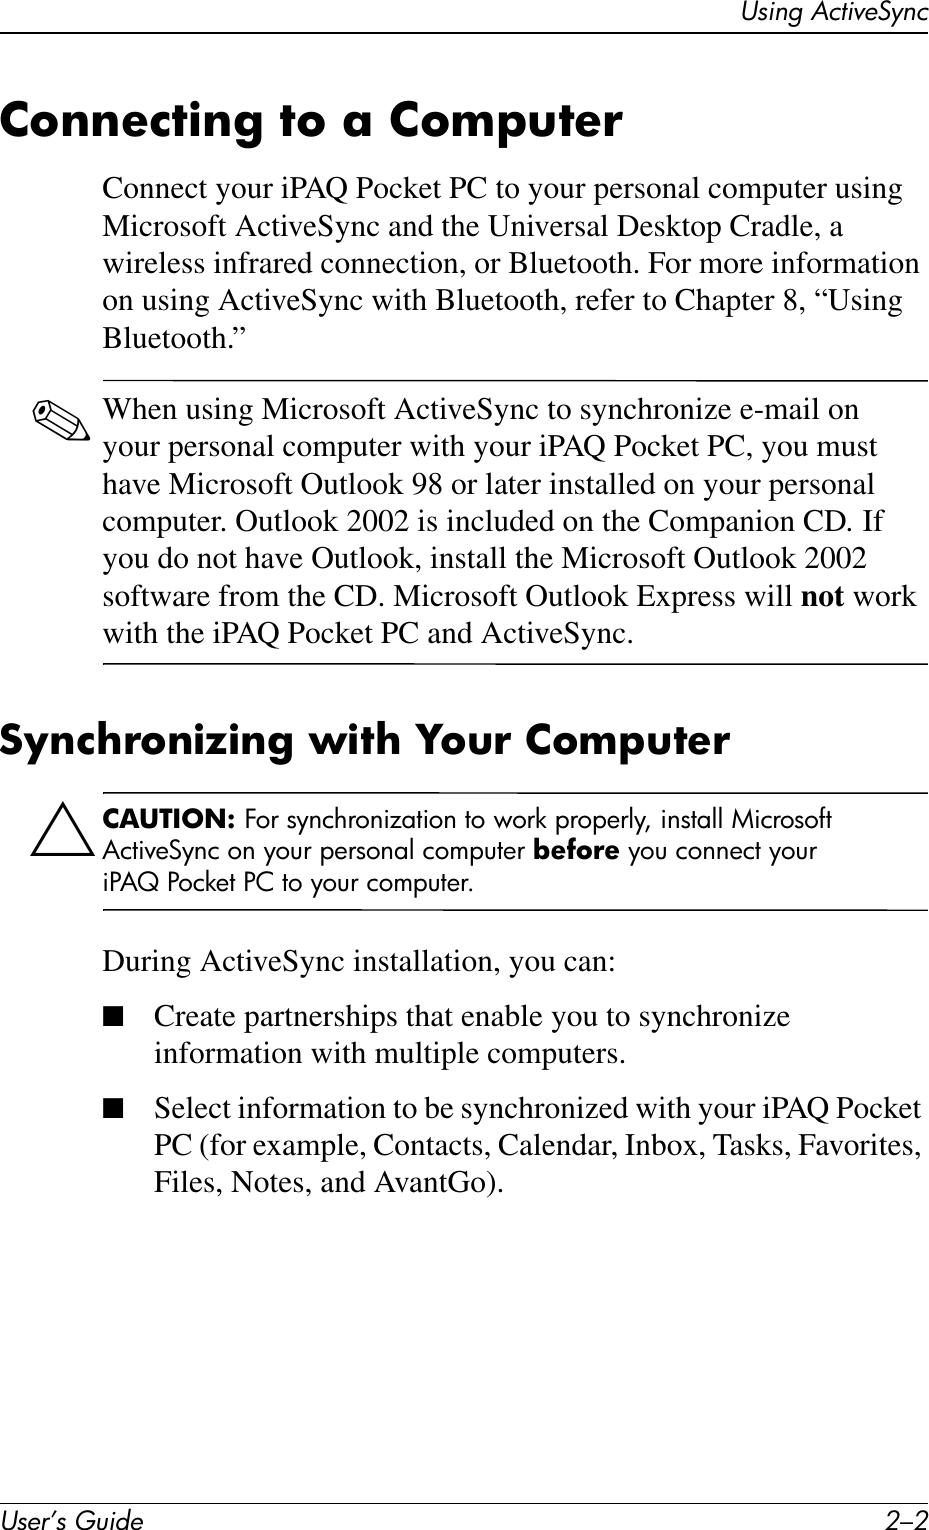 User’s Guide 2–2Using ActiveSyncConnecting to a ComputerConnect your iPAQ Pocket PC to your personal computer using Microsoft ActiveSync and the Universal Desktop Cradle, a wireless infrared connection, or Bluetooth. For more information on using ActiveSync with Bluetooth, refer to Chapter 8, “Using Bluetooth.”✎When using Microsoft ActiveSync to synchronize e-mail on your personal computer with your iPAQ Pocket PC, you must have Microsoft Outlook 98 or later installed on your personal computer. Outlook 2002 is included on the Companion CD. If you do not have Outlook, install the Microsoft Outlook 2002 software from the CD. Microsoft Outlook Express will not work with the iPAQ Pocket PC and ActiveSync.Synchronizing with Your ComputerÄCAUTION: For synchronization to work properly, install Microsoft ActiveSync on your personal computer before you connect your iPAQ Pocket PC to your computer.During ActiveSync installation, you can:■Create partnerships that enable you to synchronize information with multiple computers.■Select information to be synchronized with your iPAQ Pocket PC (for example, Contacts, Calendar, Inbox, Tasks, Favorites, Files, Notes, and AvantGo).